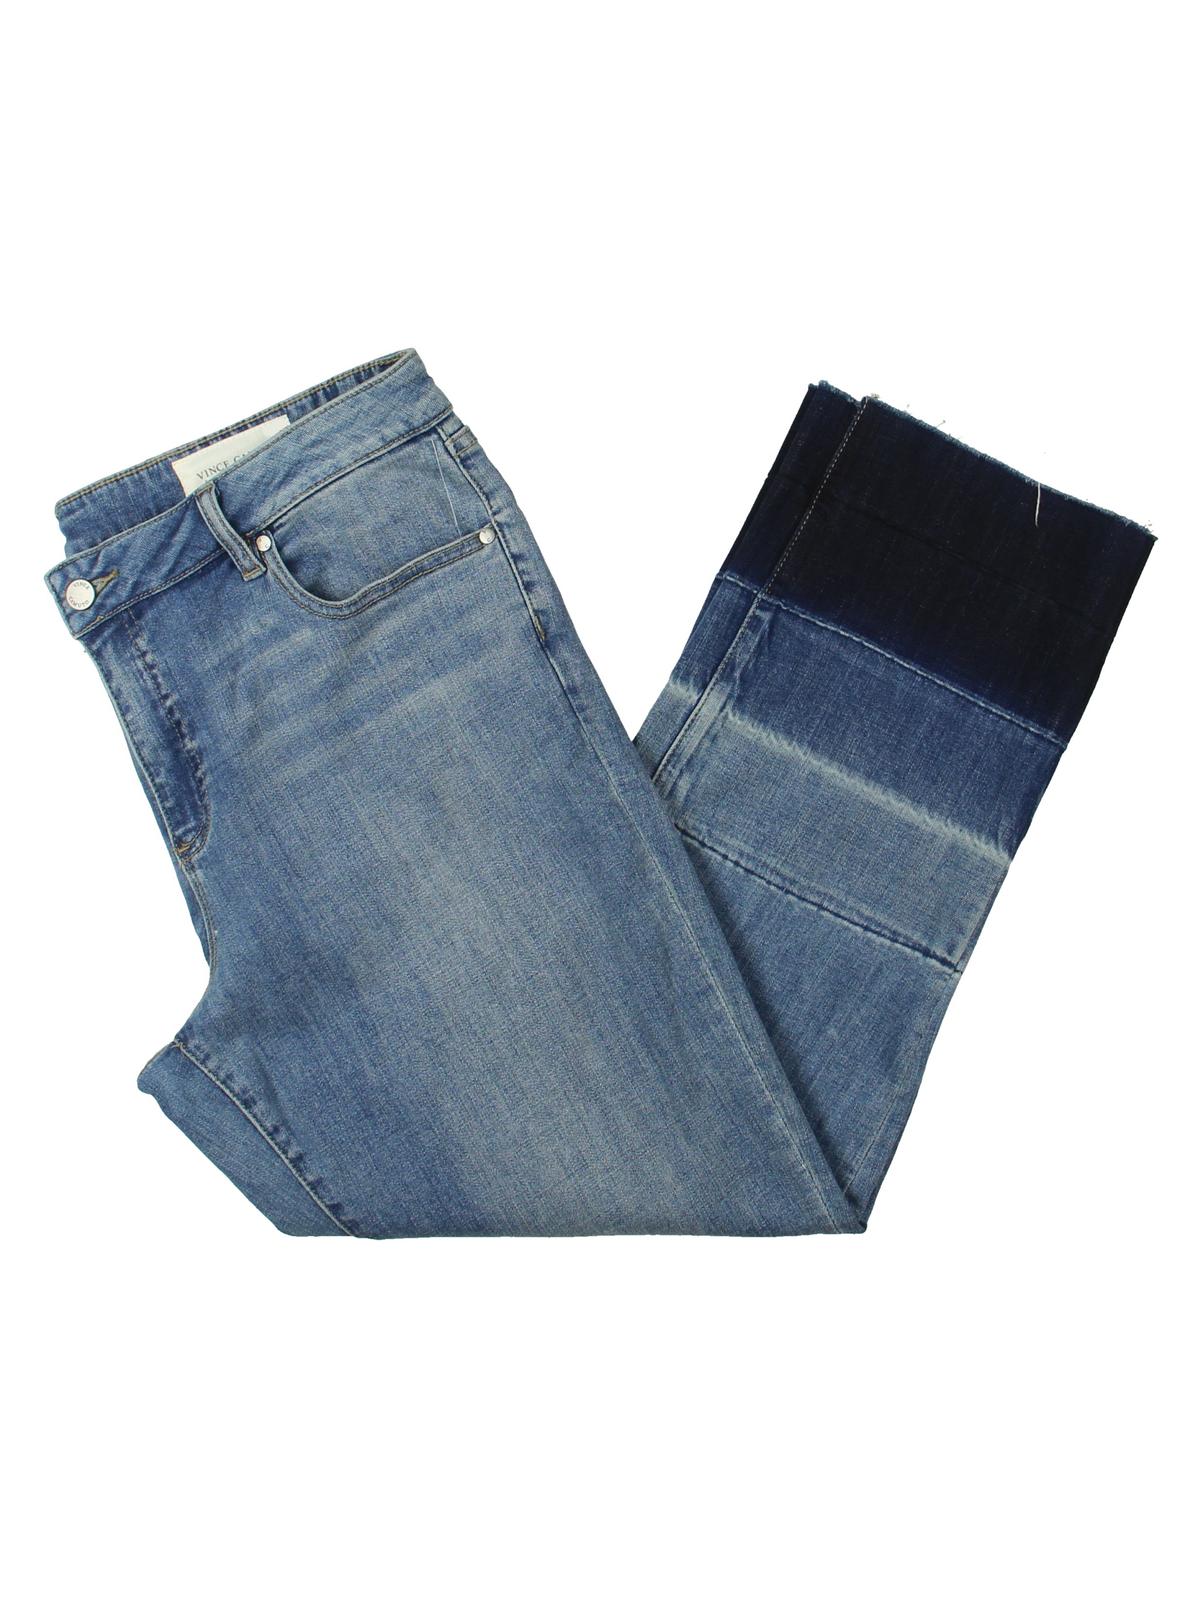 Refried Apparel Womens Denim Destroyed Bootcut Jeans